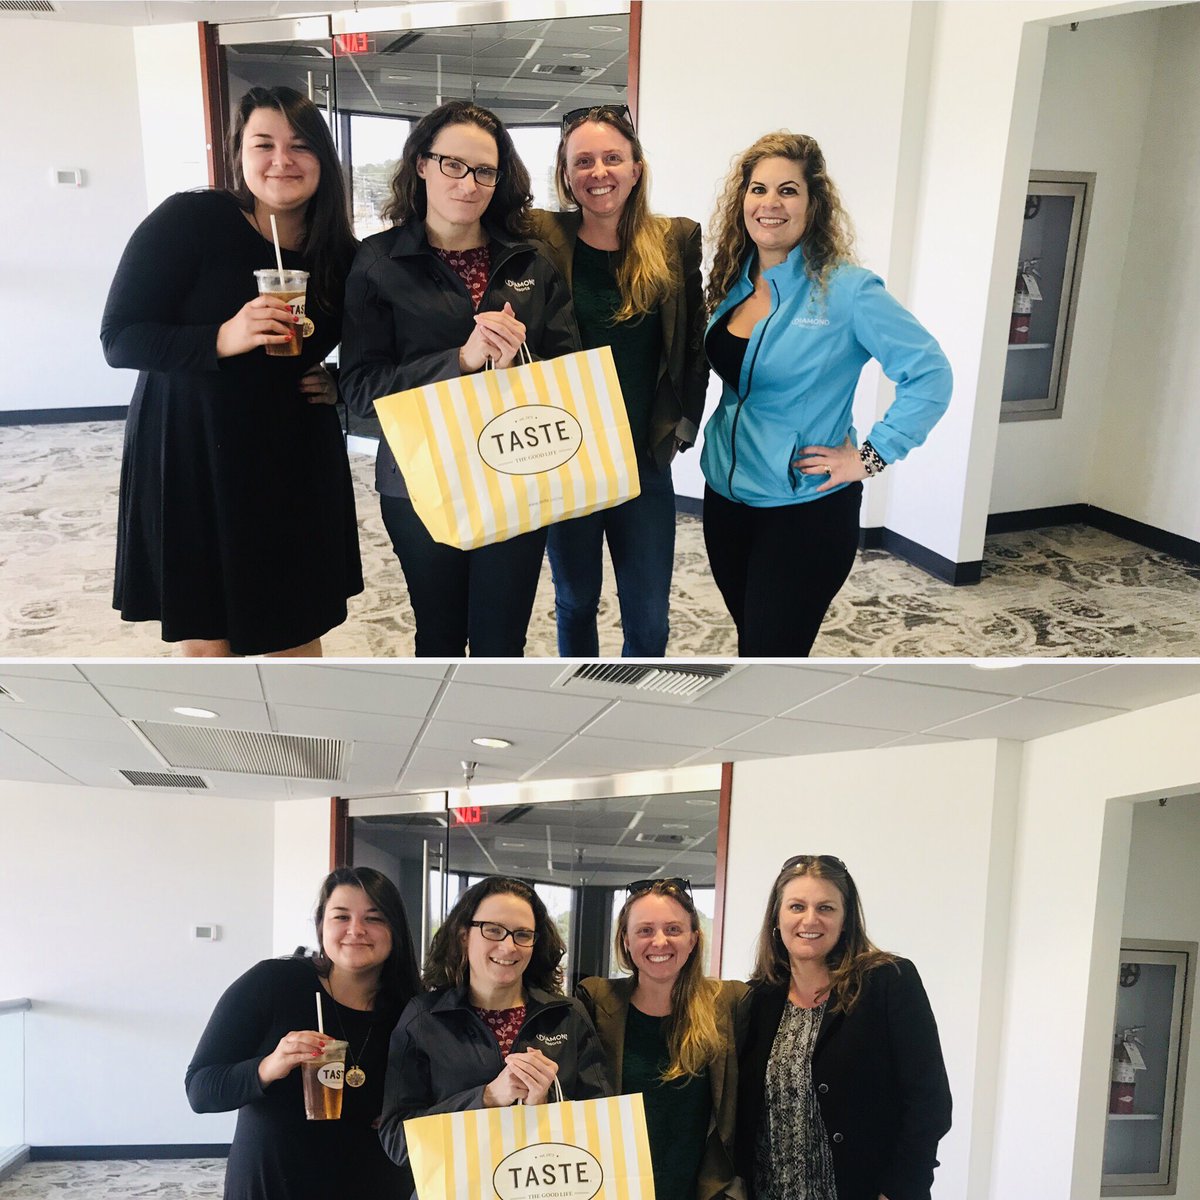 We love our sales team! Thanks for your partnership and for providing us with a wonderful team lunch. @vb_mandy @0neTeamVA #OneTeamVA #WhyAreYouNotHere